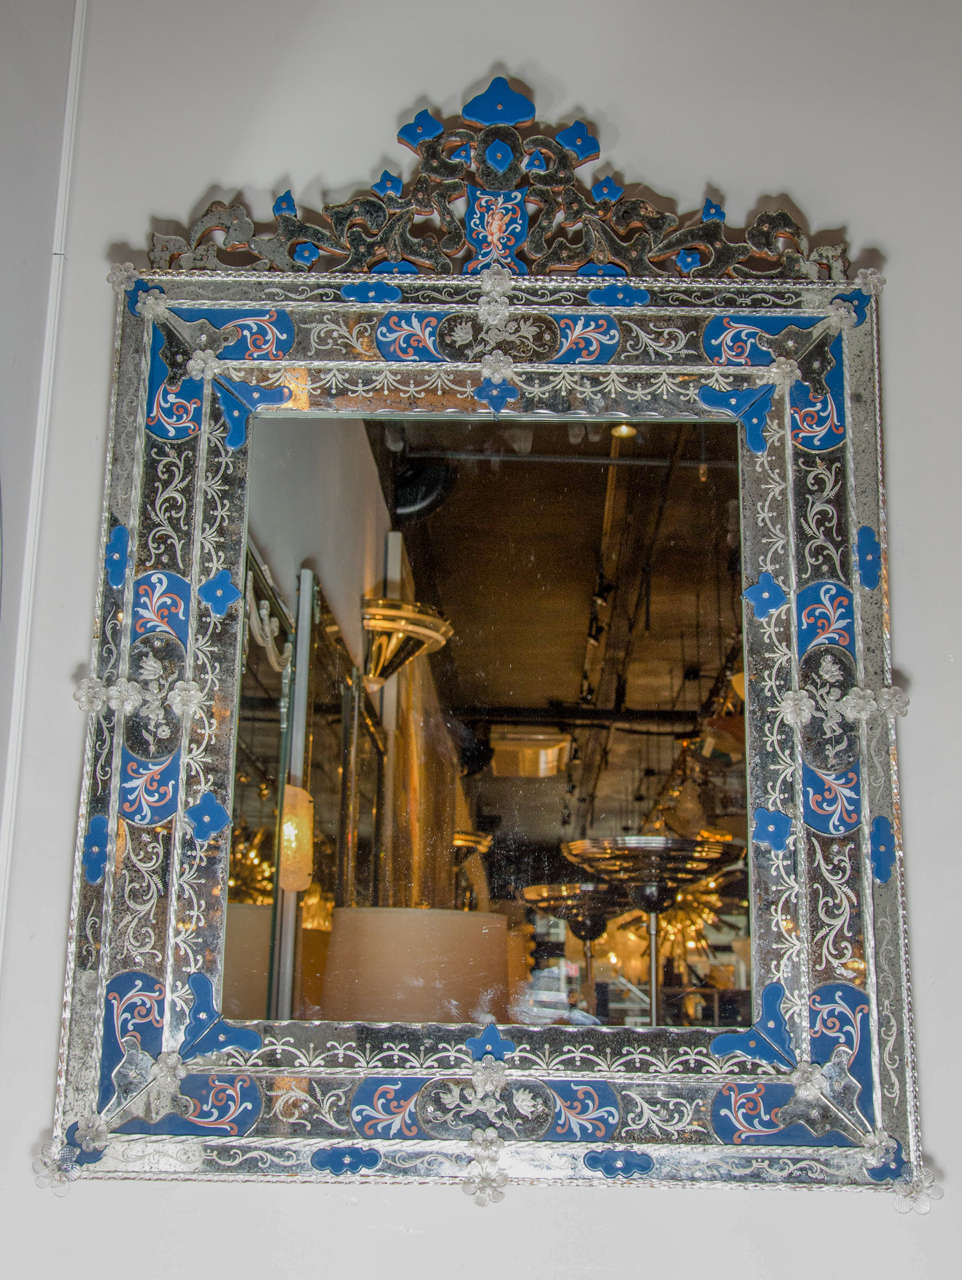 Exquisite Venetian style mirror with inset Royal Blue appliqués, some with hand-painted flourishes, that surround the mirror and embellish the crown.  This mirror supports a stunning crown centerpiece with multiply borders of reversed etched and